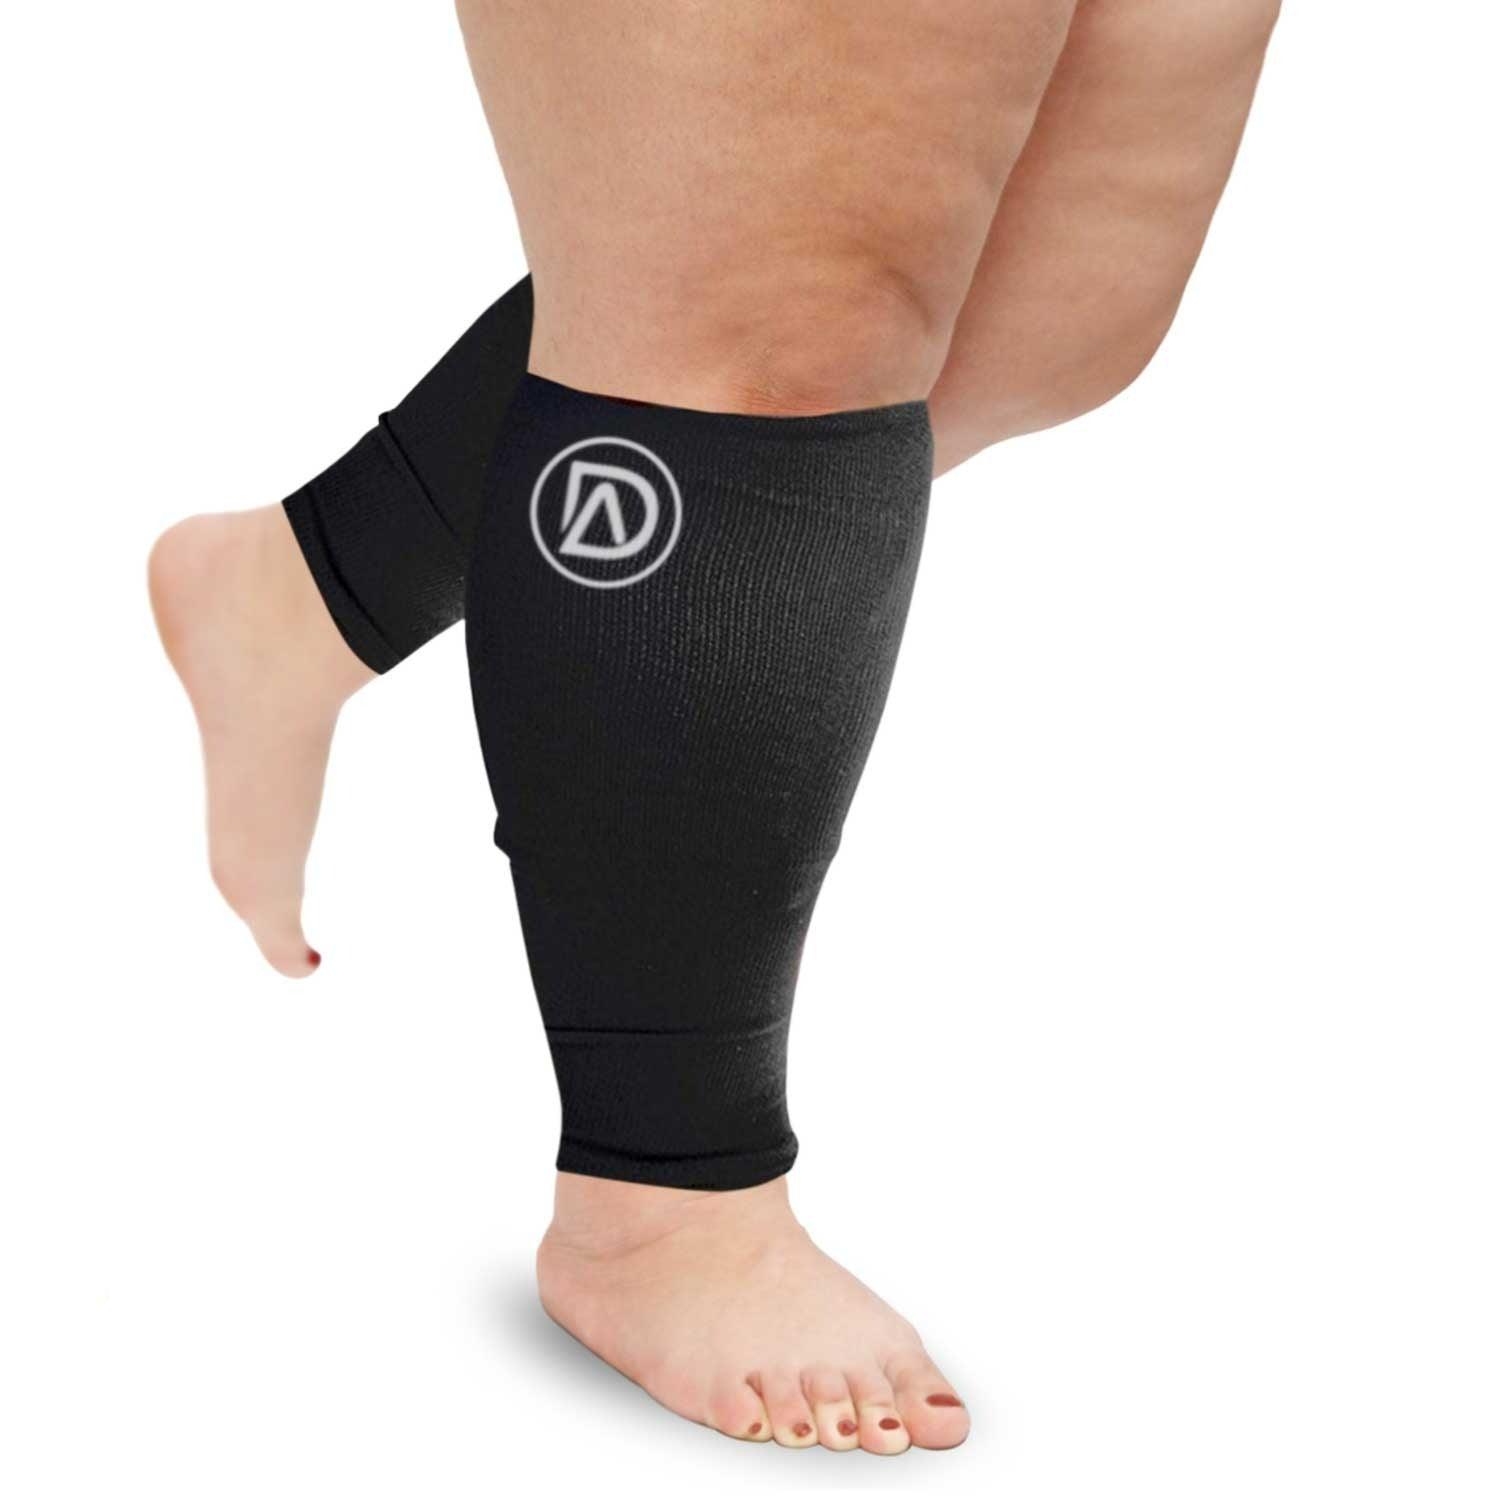 Buy Beister 1 Pair Compression Calf Sleeves (20-30mmHg), Perfect